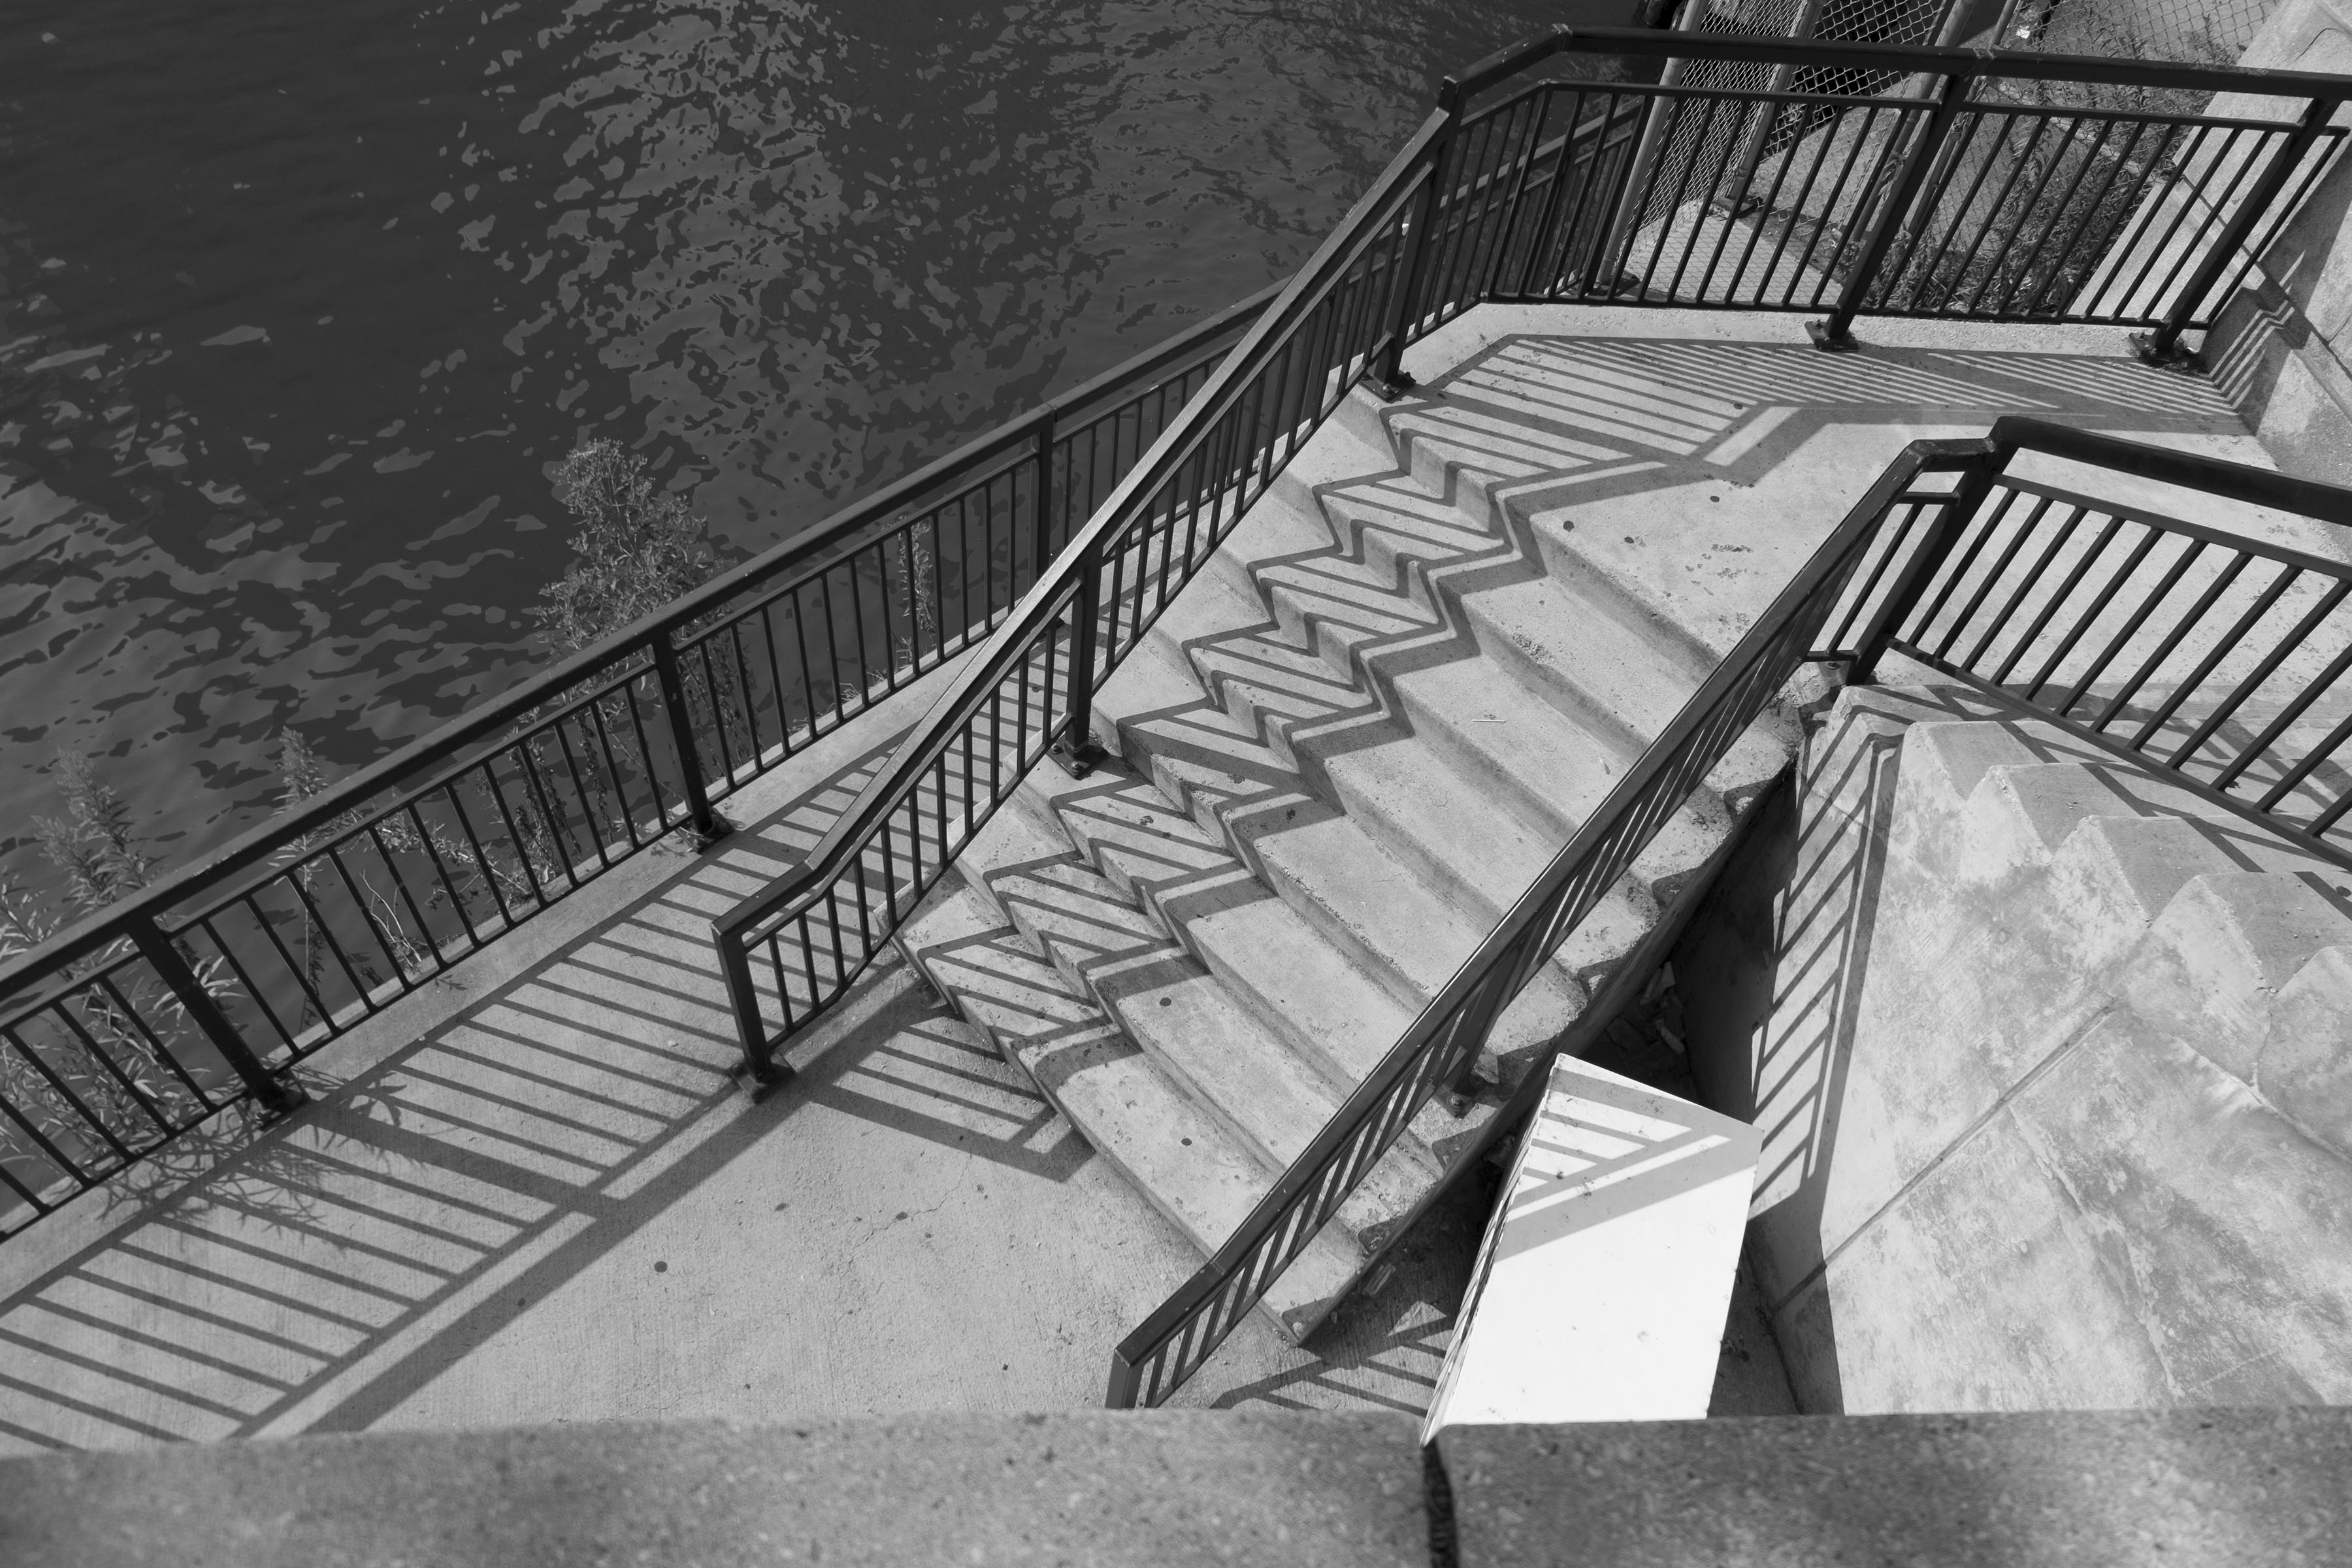 A photograph of a staircase down to a riverside. The stair railings are casting stark shadows on the stairs.